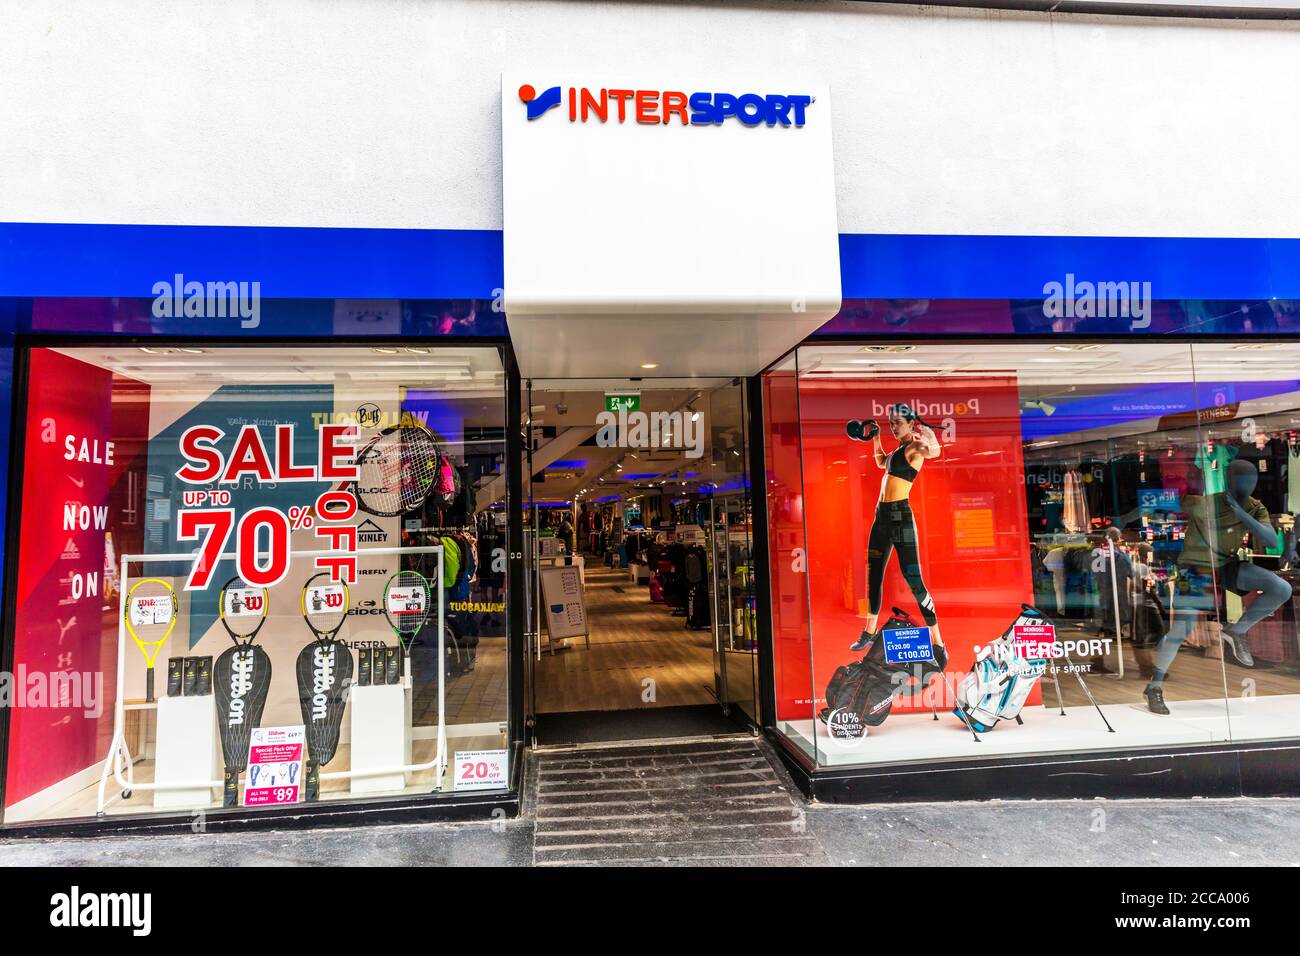 Intersport shop, Intersport sports shop, Intersport store, sporting goods  retailer, Lincoln City, Lincolnshire, UK, England, Intersport, shop, store  Stock Photo - Alamy